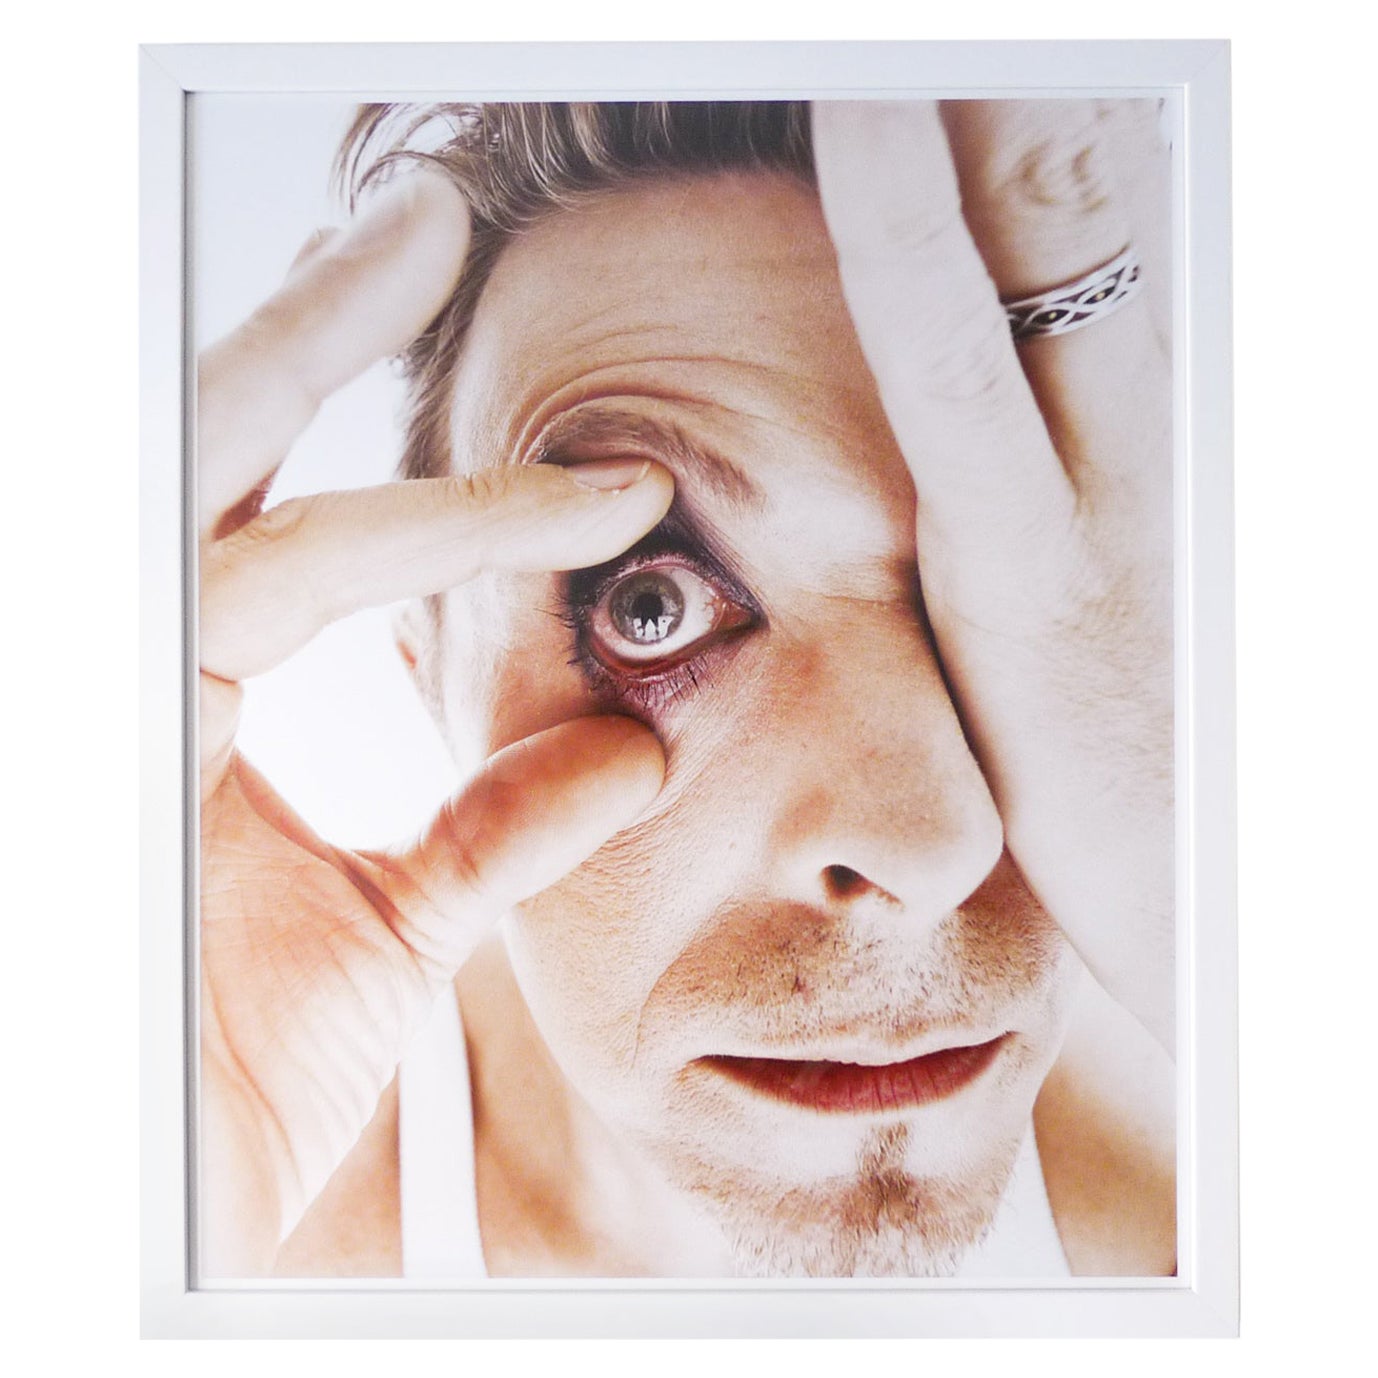 Limited Edition Signed “Bowie’s Eye" Print by Rankin, Dazed & Confused 1995 For Sale